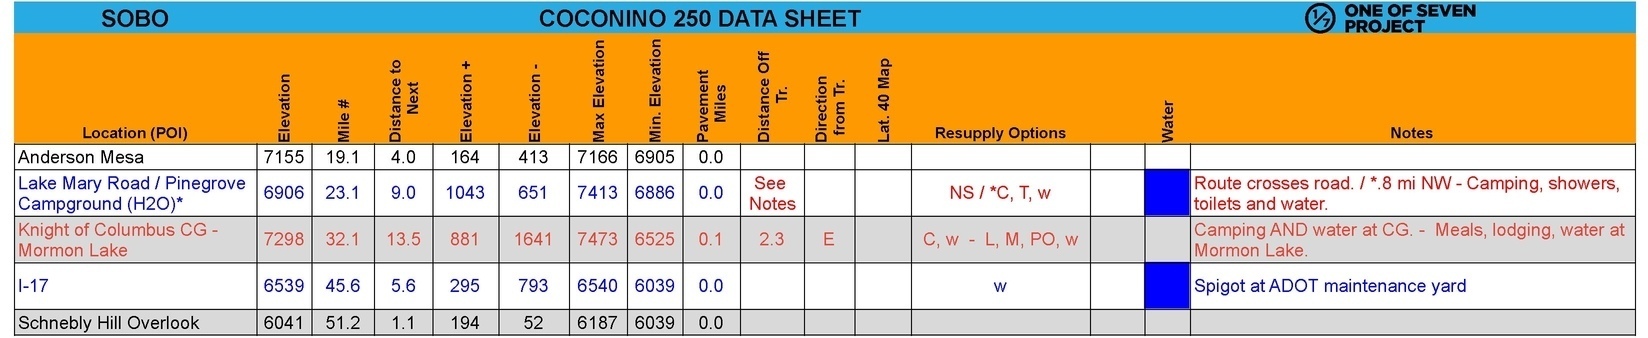 Coconino 250 Data Sheet Example, bikepacking, guides, planning aids